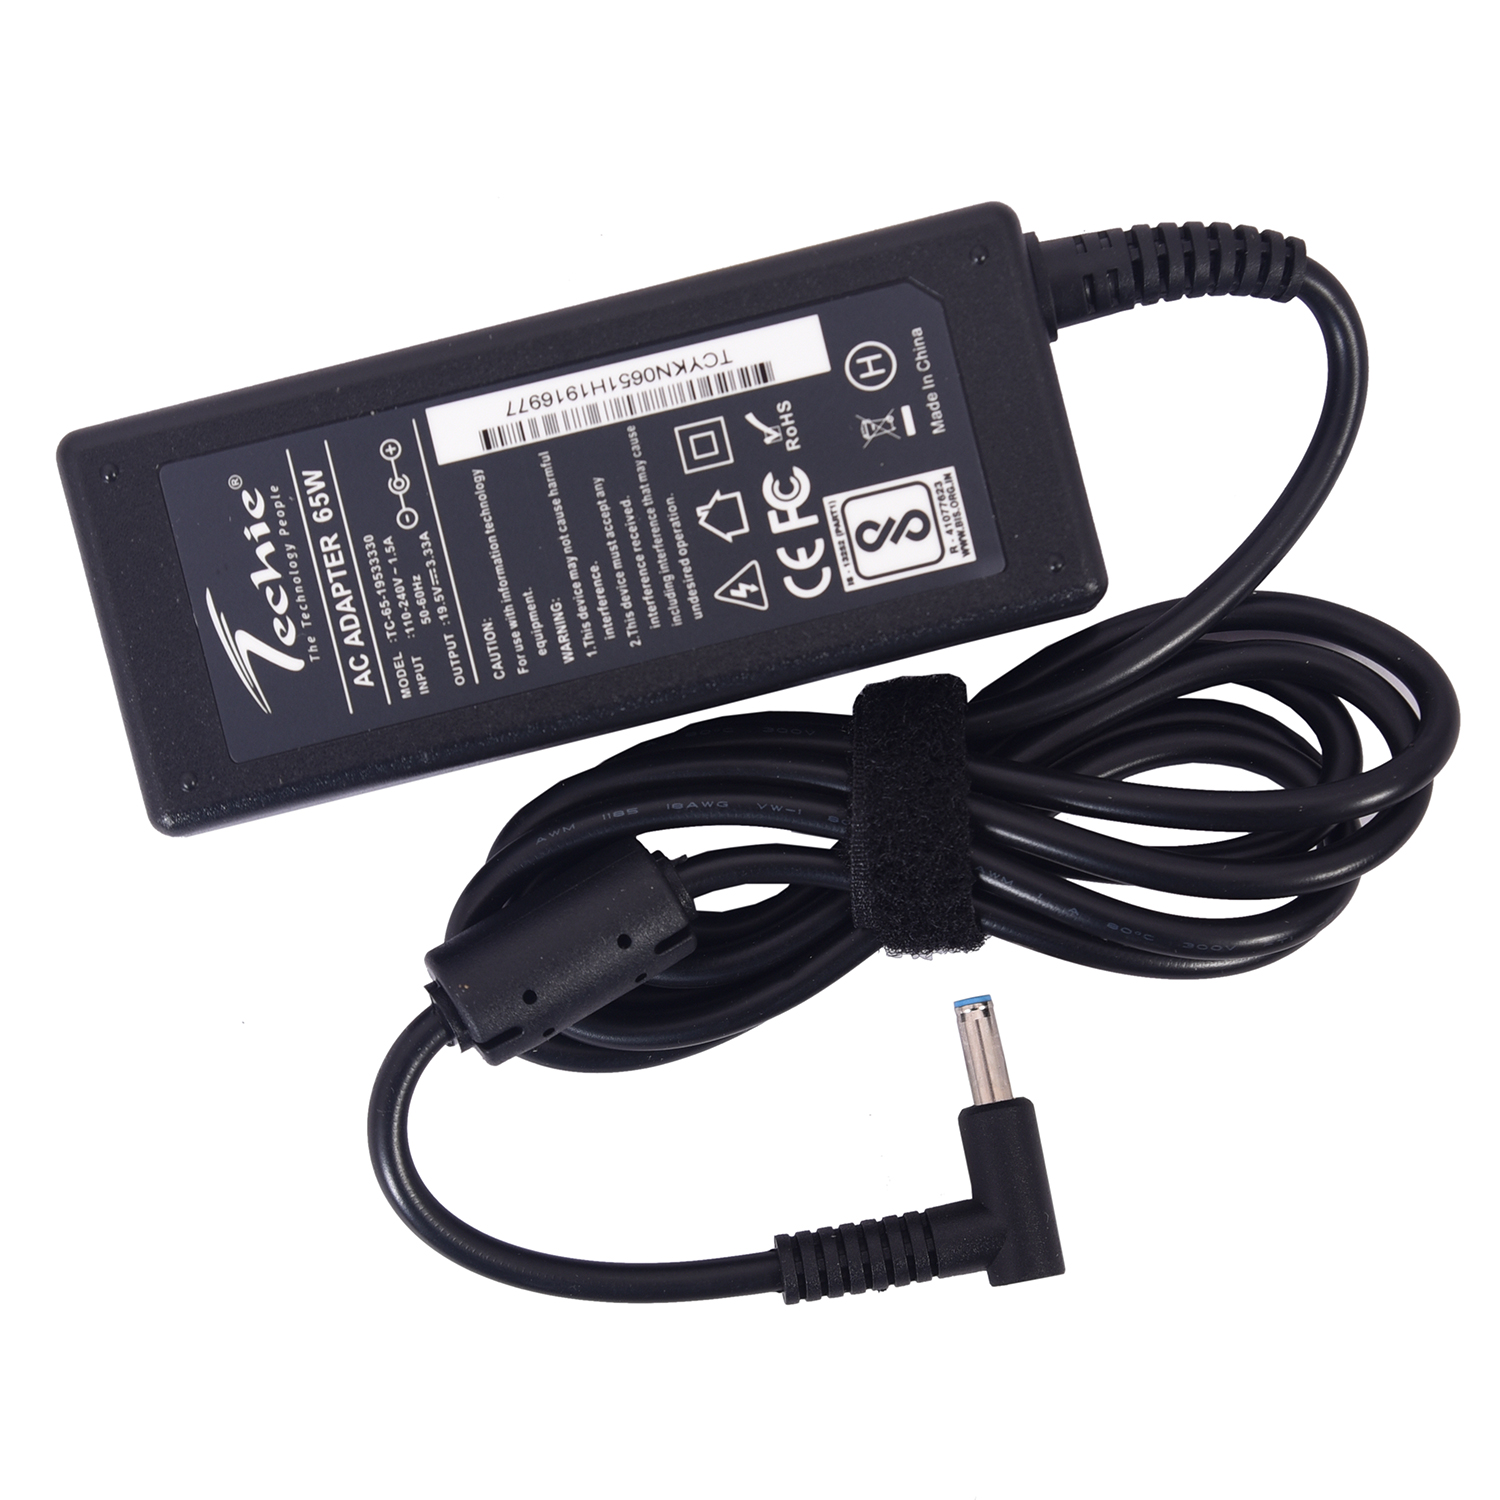 Compatible HP laptop charger 65W 19.5V 3.33A Pin size 4.5mm x 3.0mm (Techie)